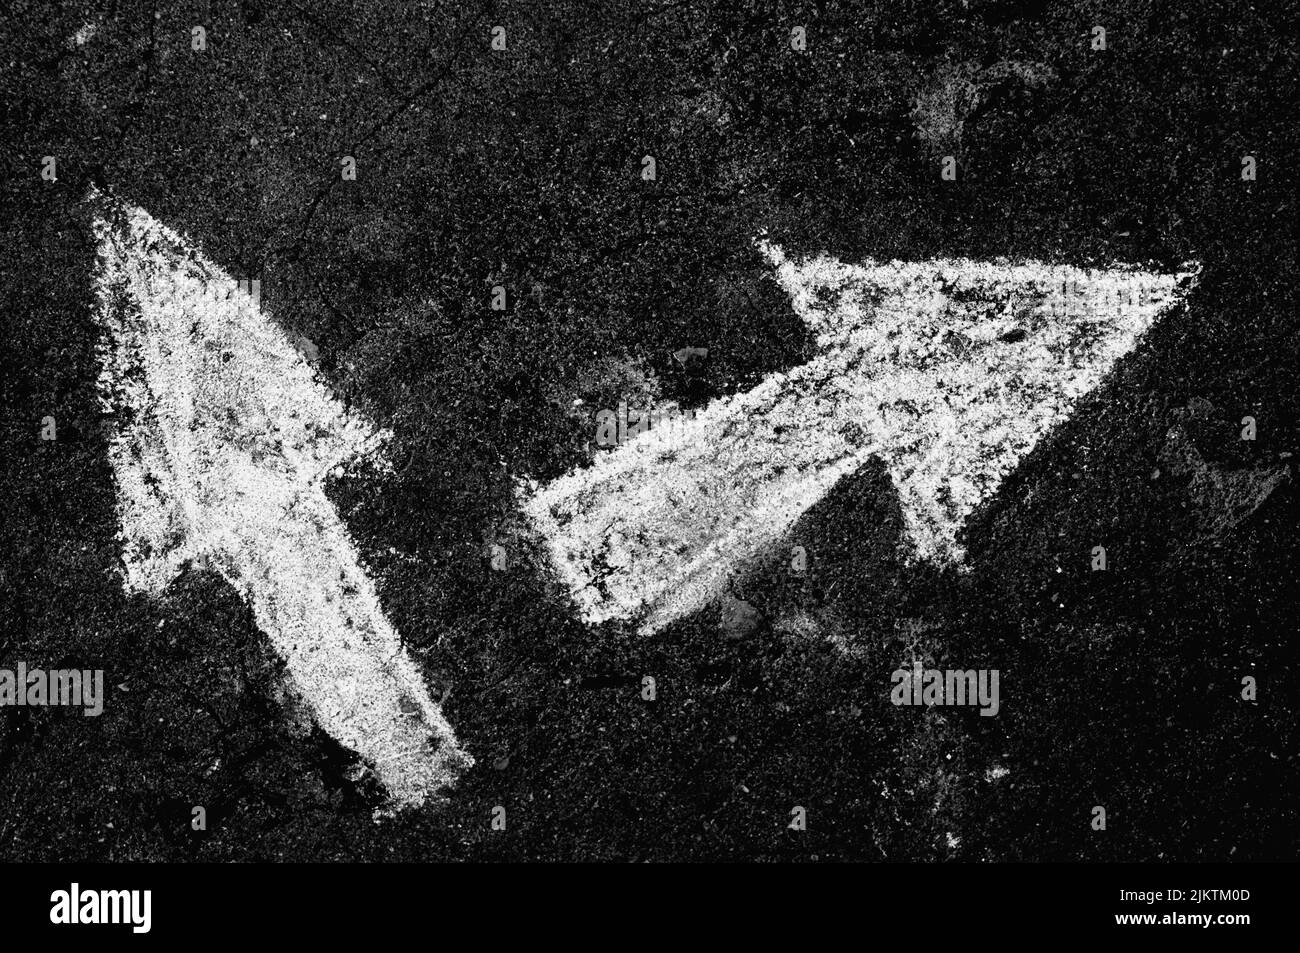 Two arrows pointing to different directions drawn on a black surface with chalk Stock Photo